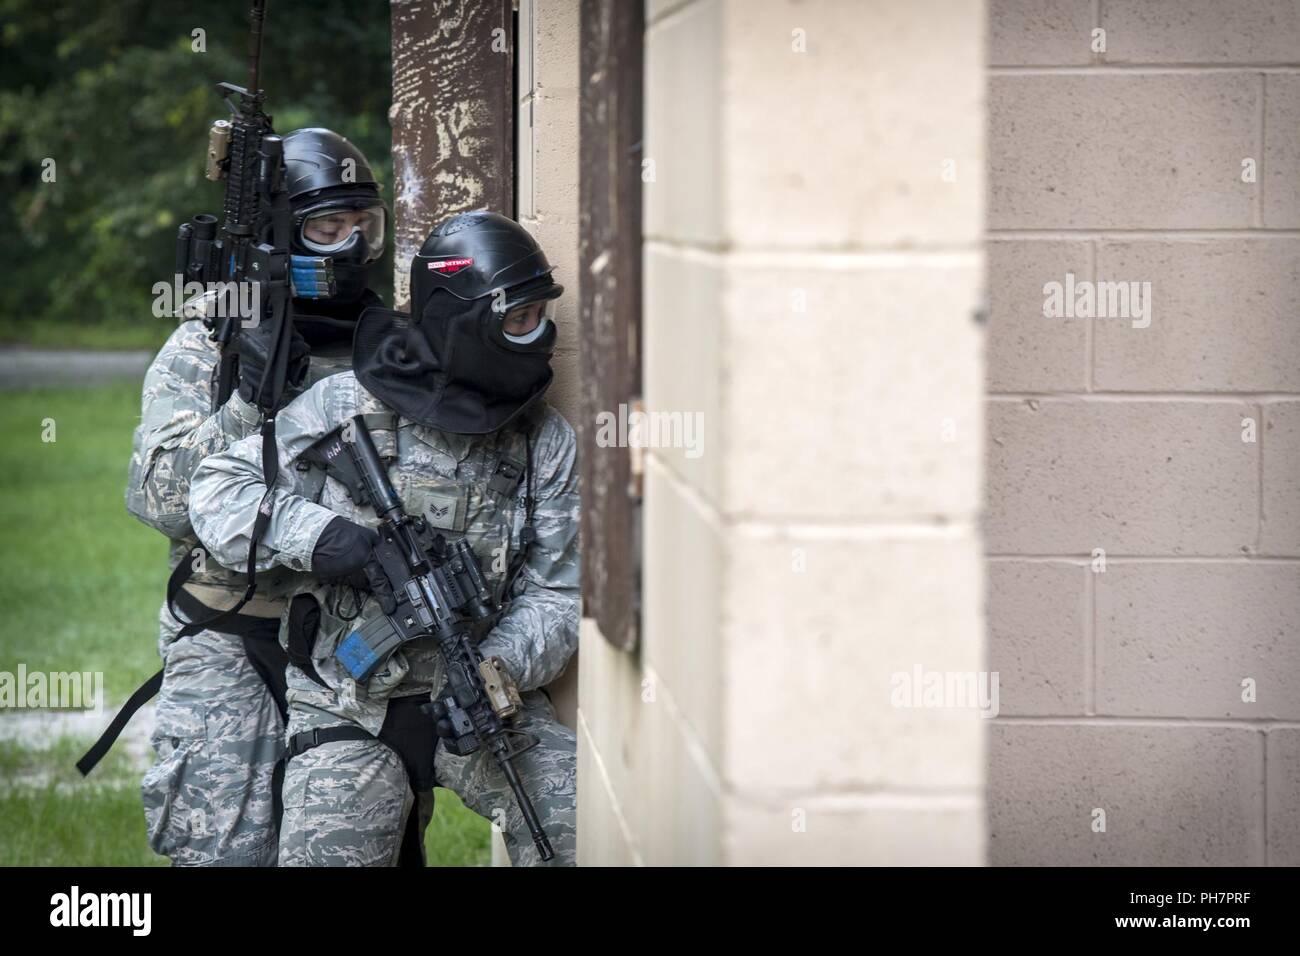 Airmen from the 23d Security Forces Squadron (SFS) enter a building during a Force on Force training scenario, June 29, 2018, at Moody Air Force Base, Ga. This training was held to ensure SFS Airmen are proficient in various tactics and procedures such as: building clear out, team movements, hostage rescue and properly applying cover fire. The scenario required Airmen to maneuver through multiple buildings to rescue a simulated victim guarded by opposing forces. Stock Photo